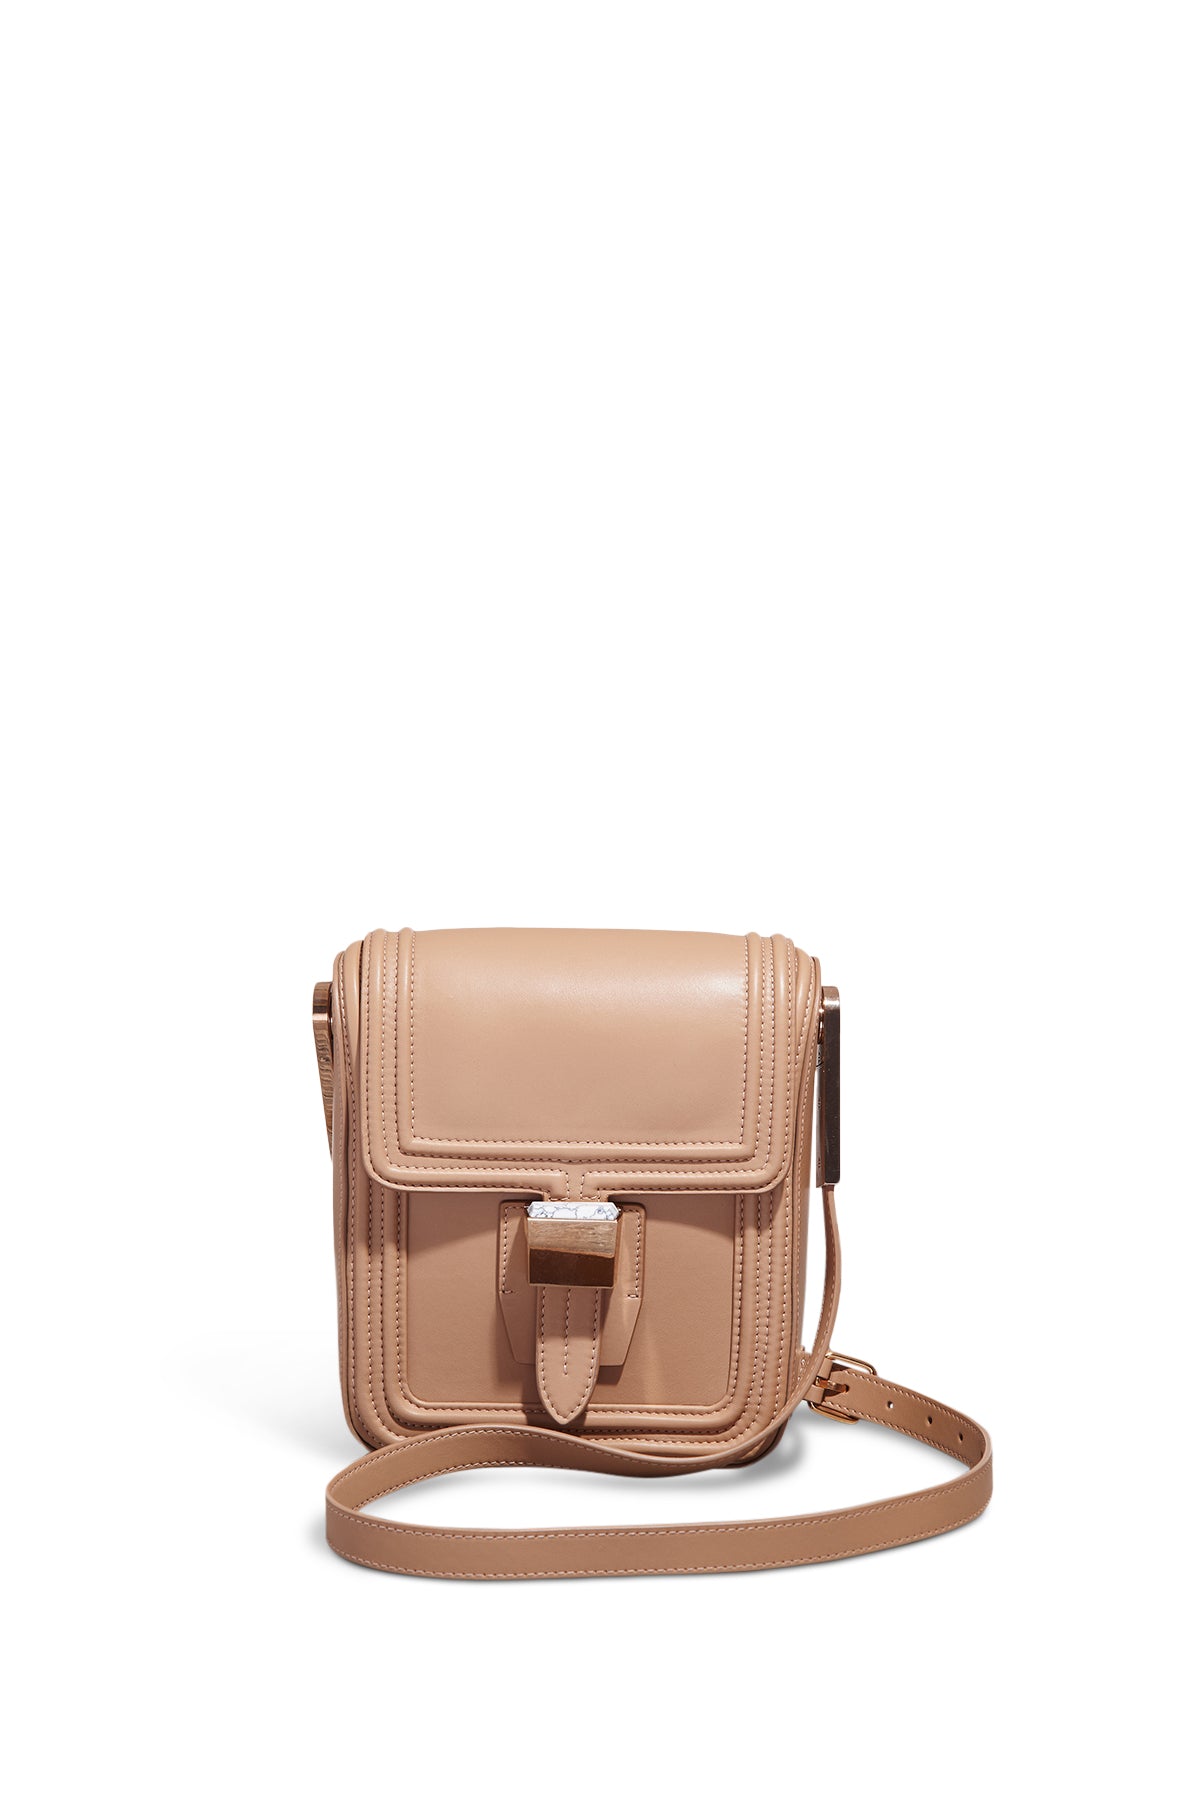 Marvelle Crossbody Bag in Nude Nappa Leather